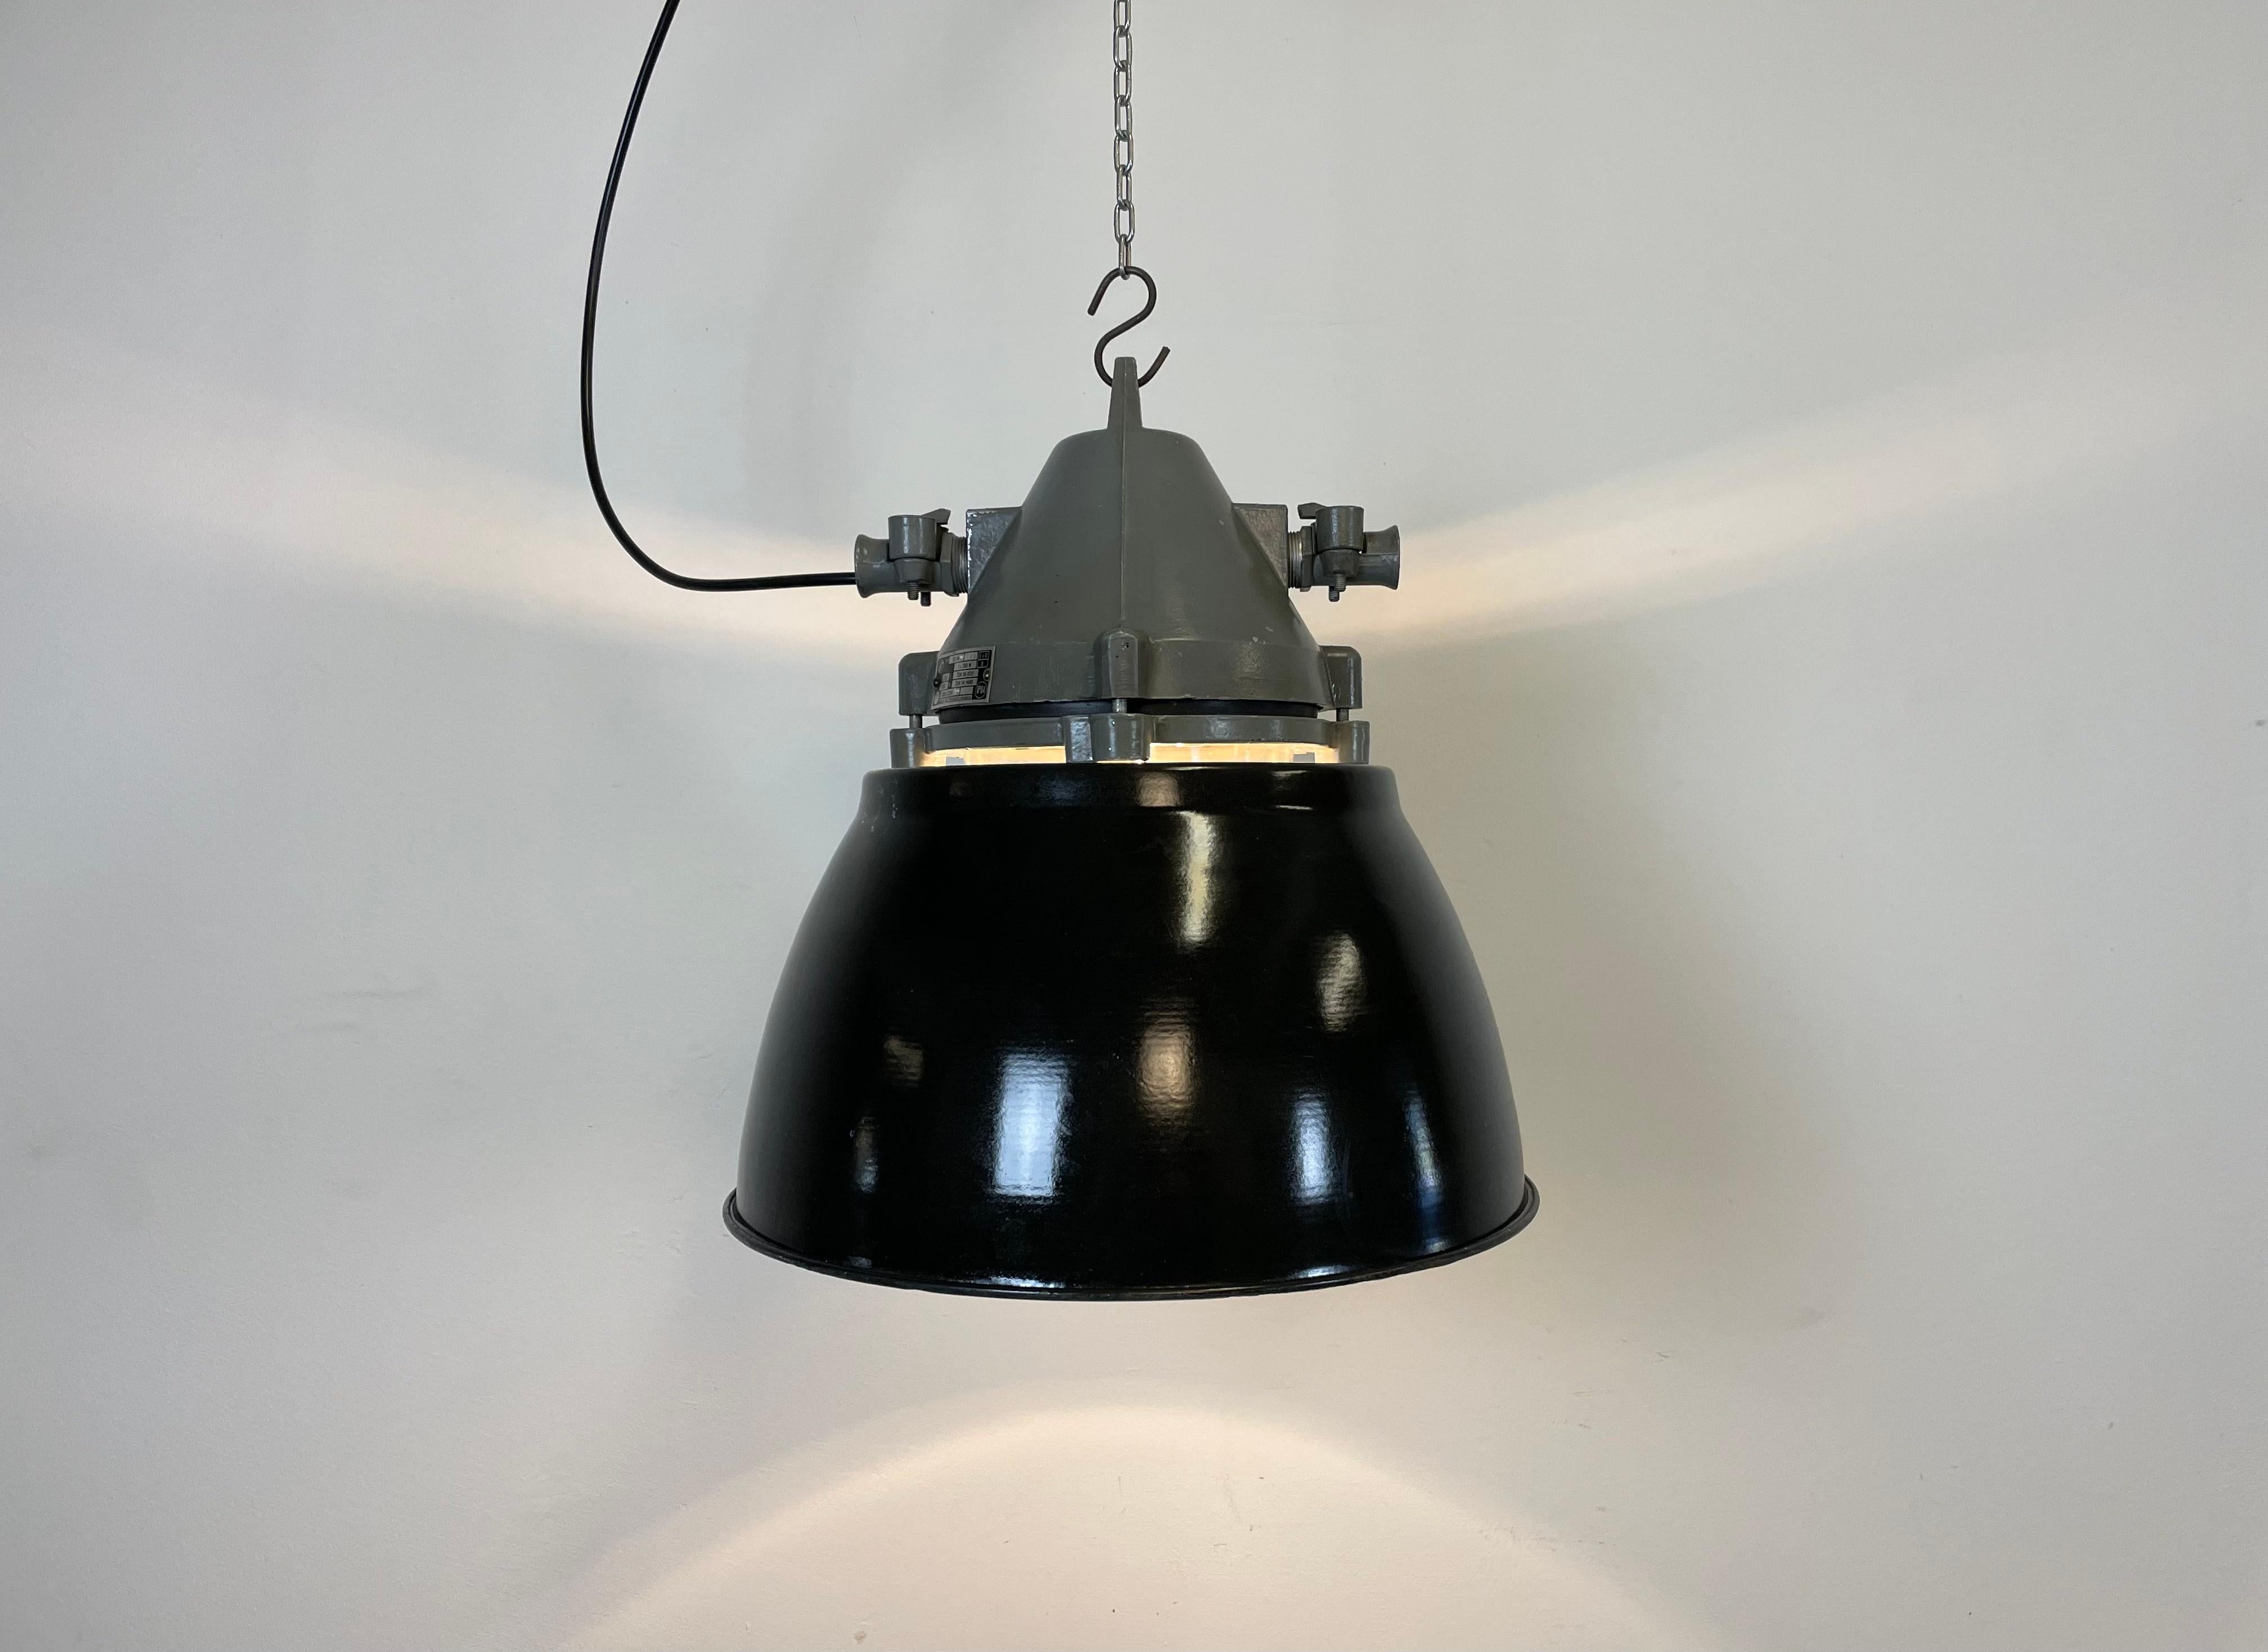 Dark Grey Explosion Proof Lamp with Black Enameled Shade, 1970s For Sale 5